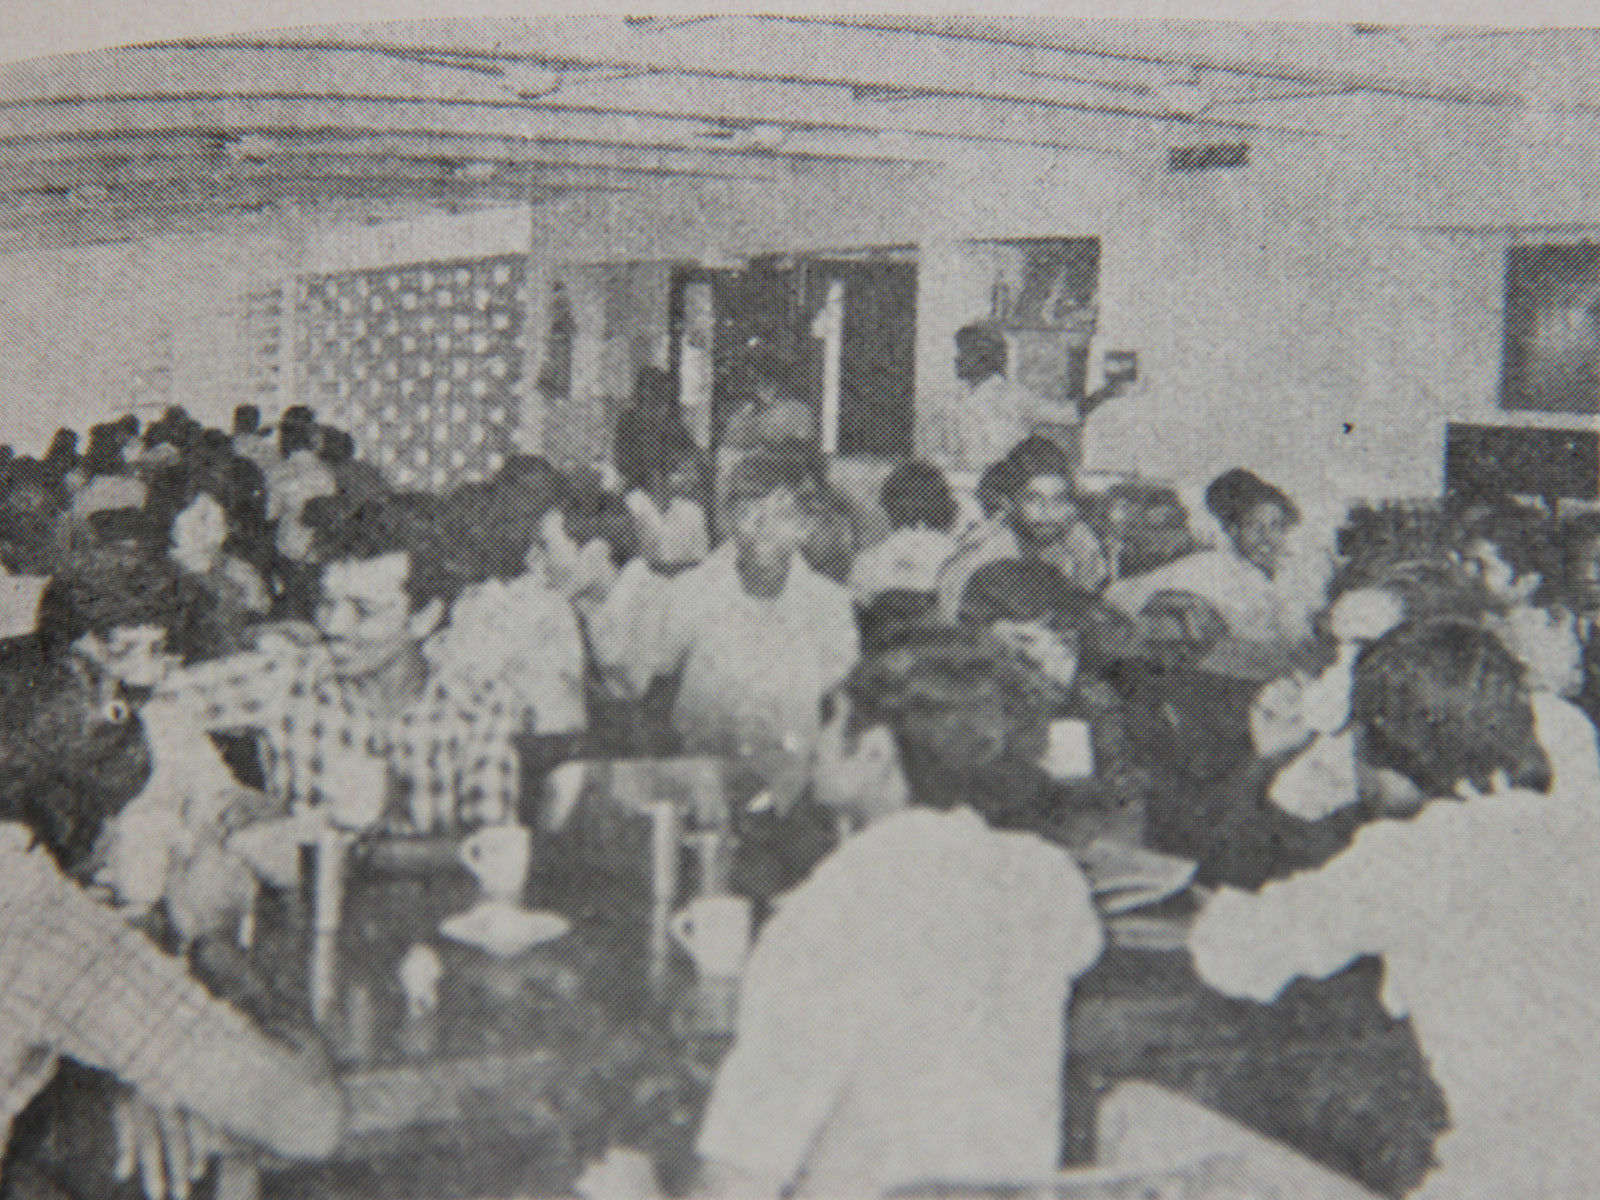 LDCE Canteen in early days